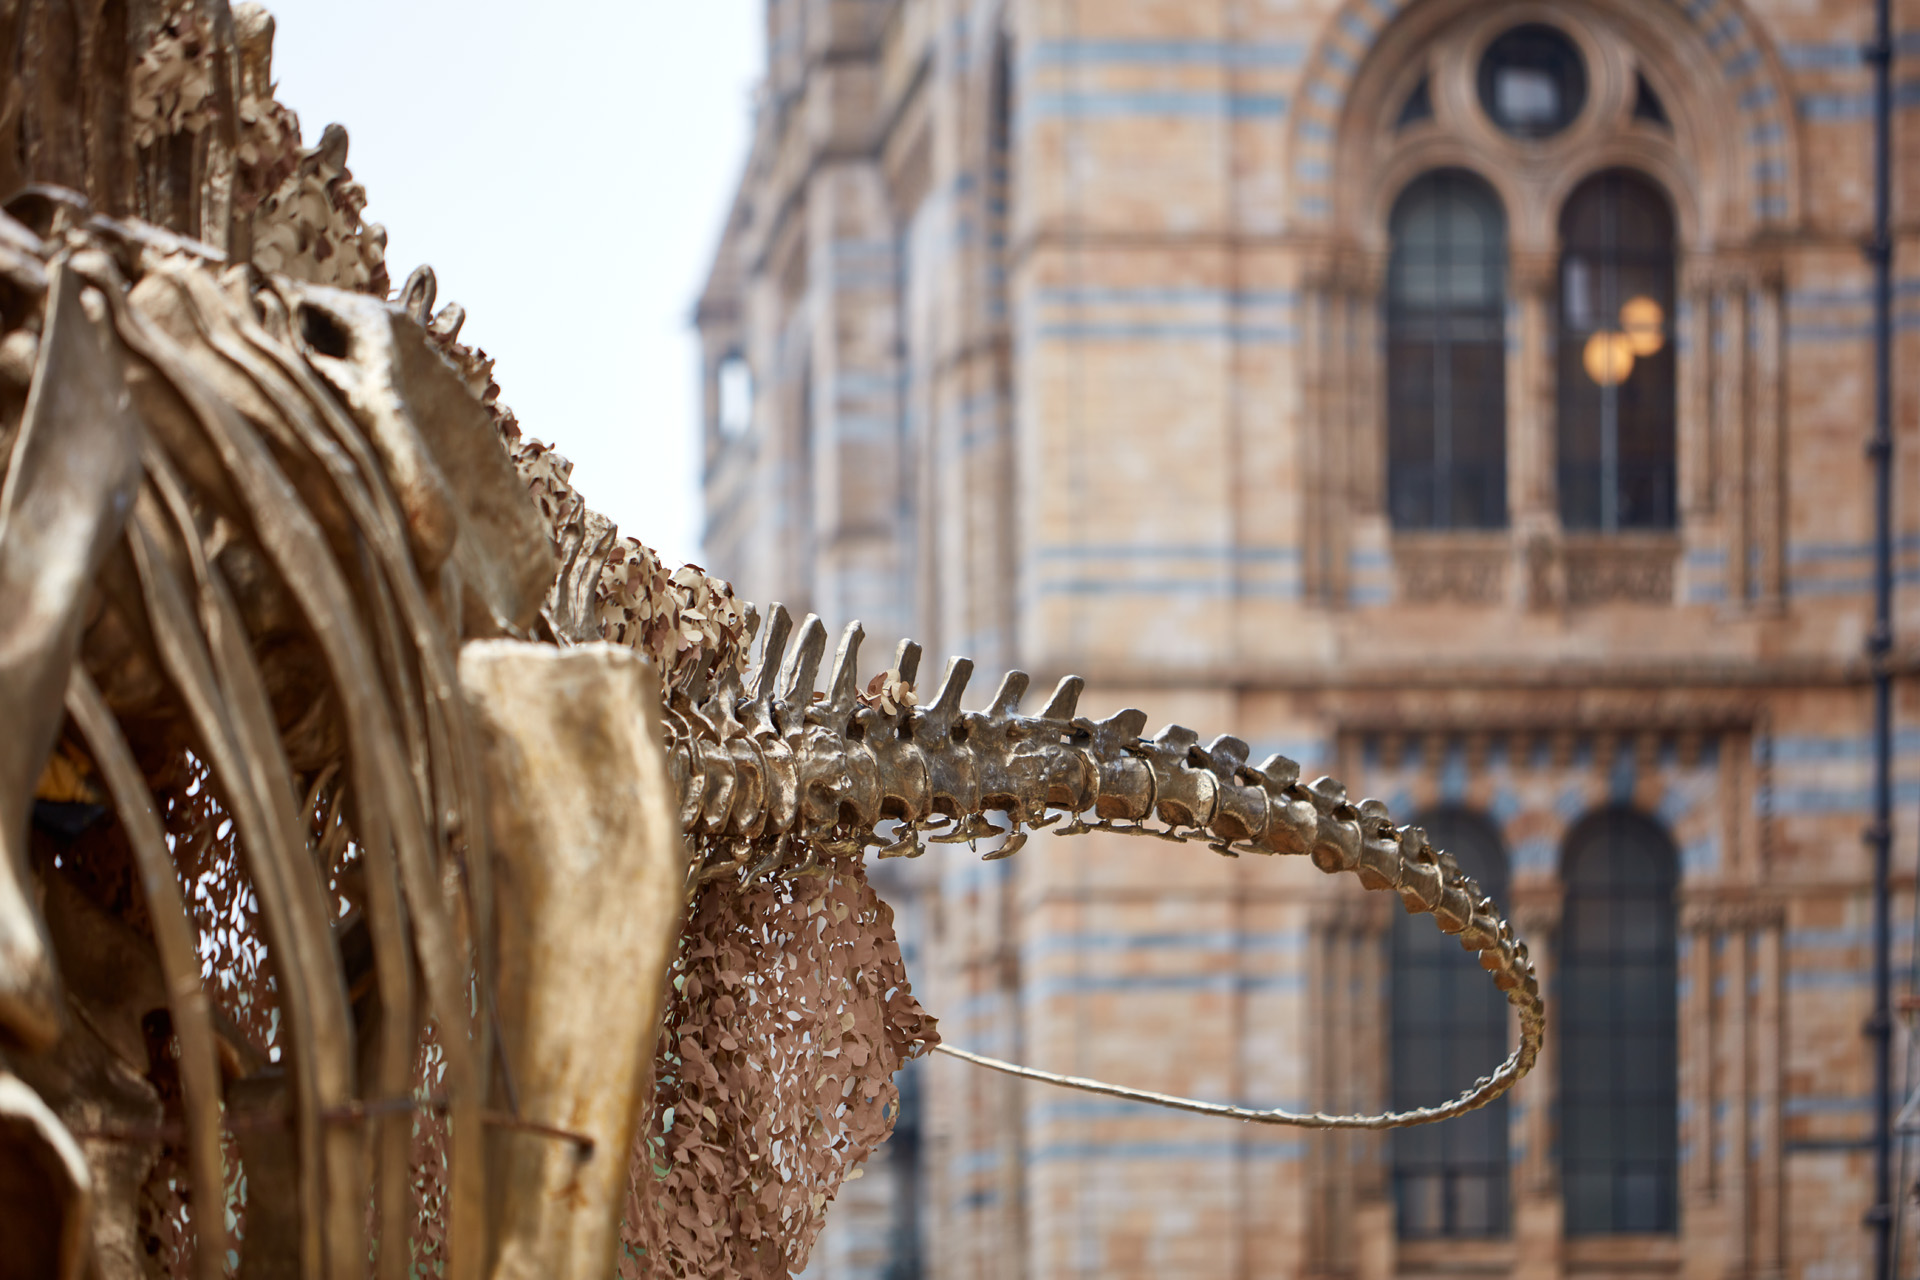 Diplodocus in the Natural History Museum Garden